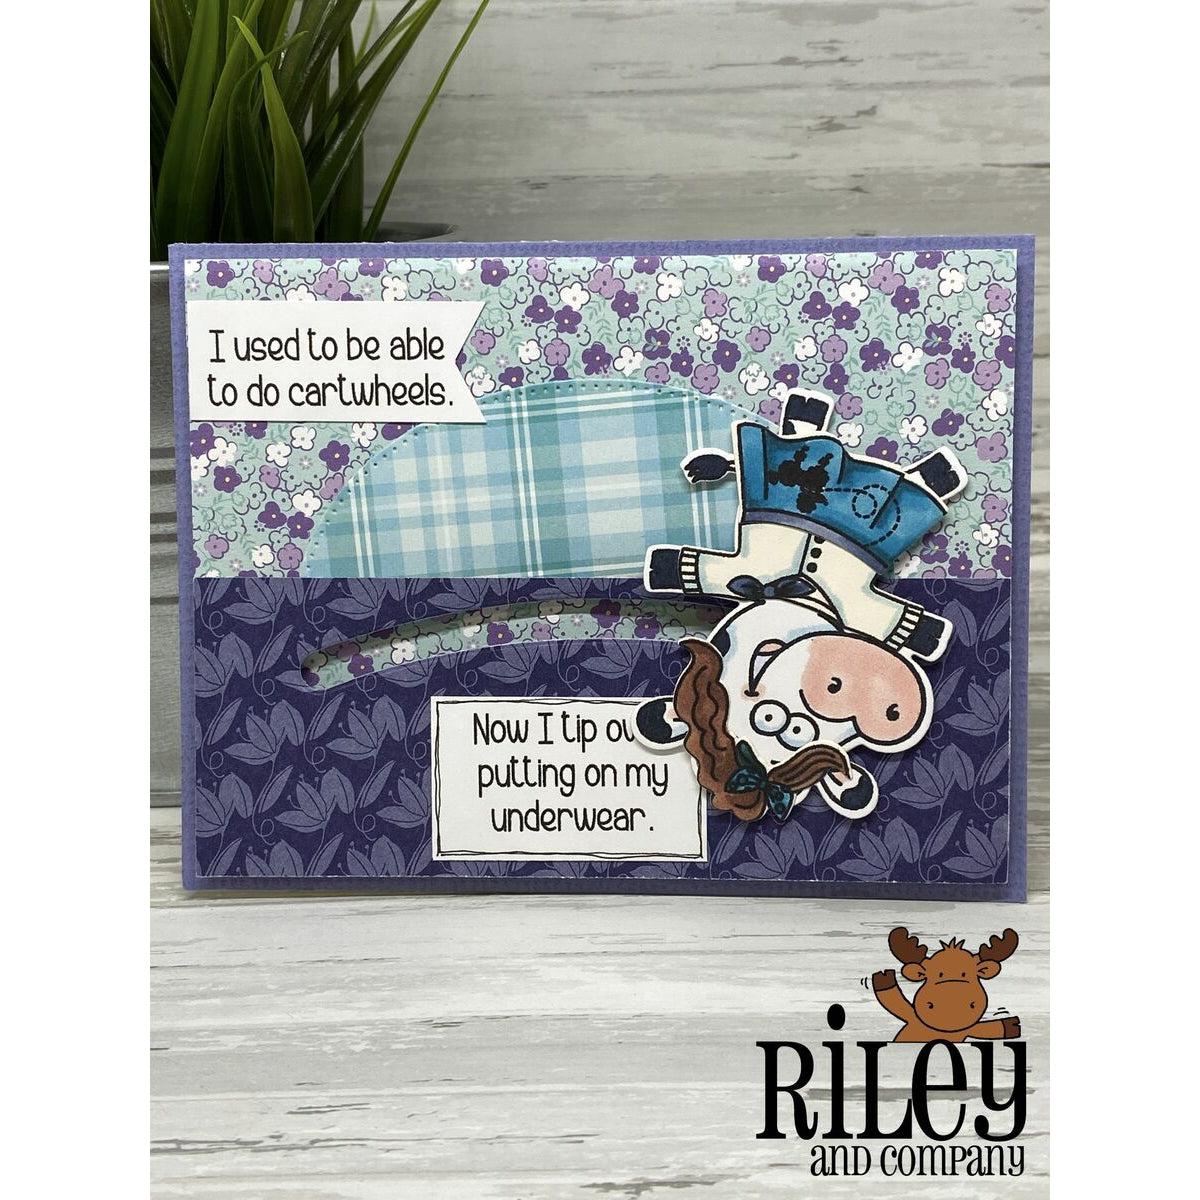 Cartwheels Cling Stamp by Riley &amp; Co